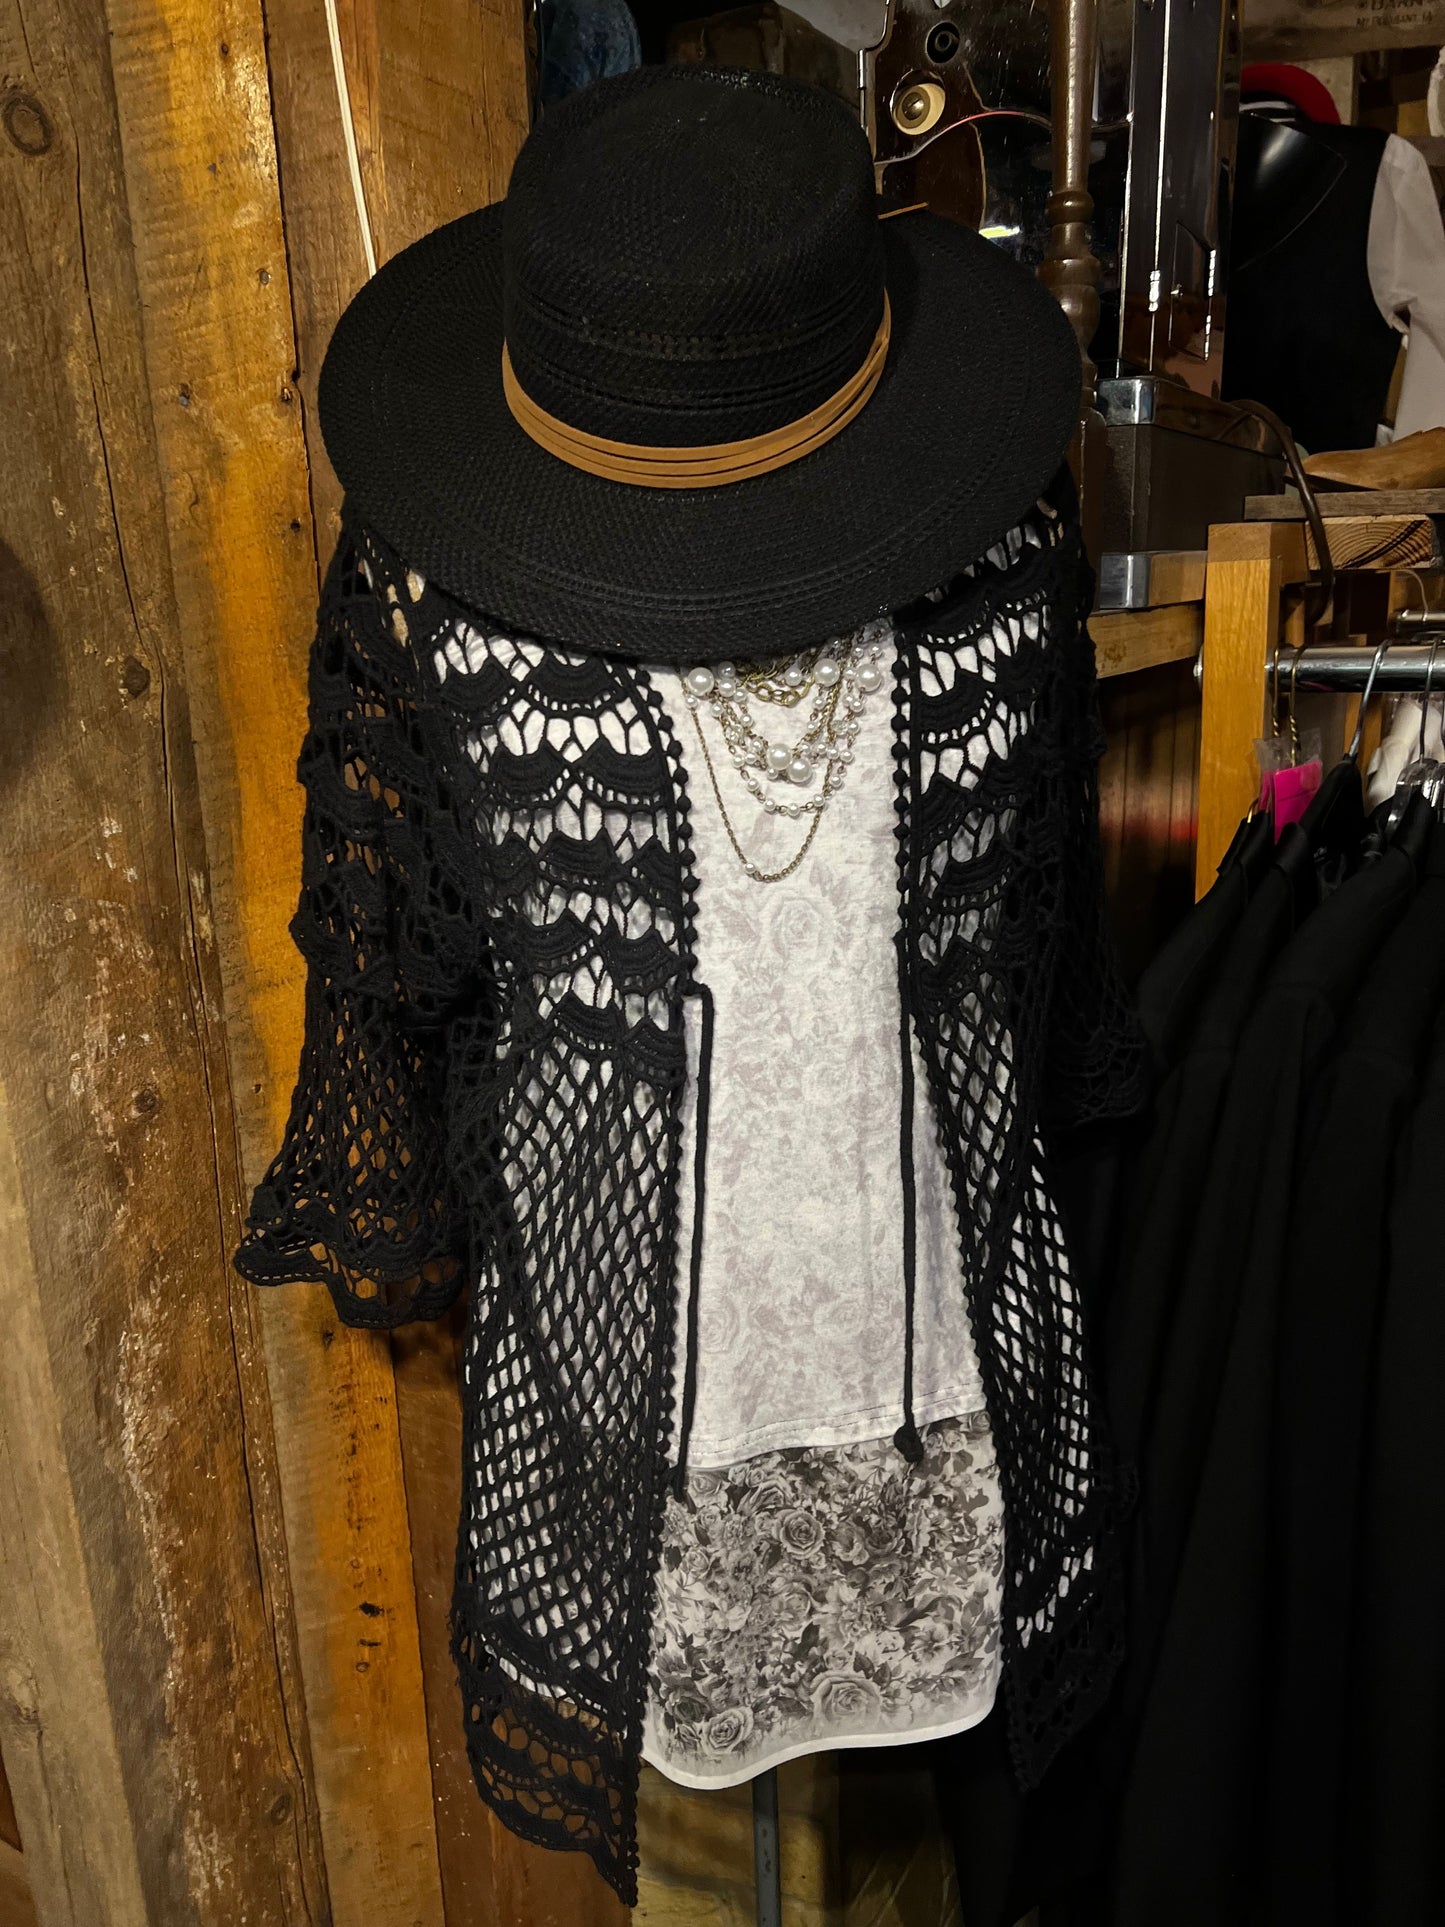 Pearl and chain statement necklace with crochet cardigan and rose tank. Gamber hat